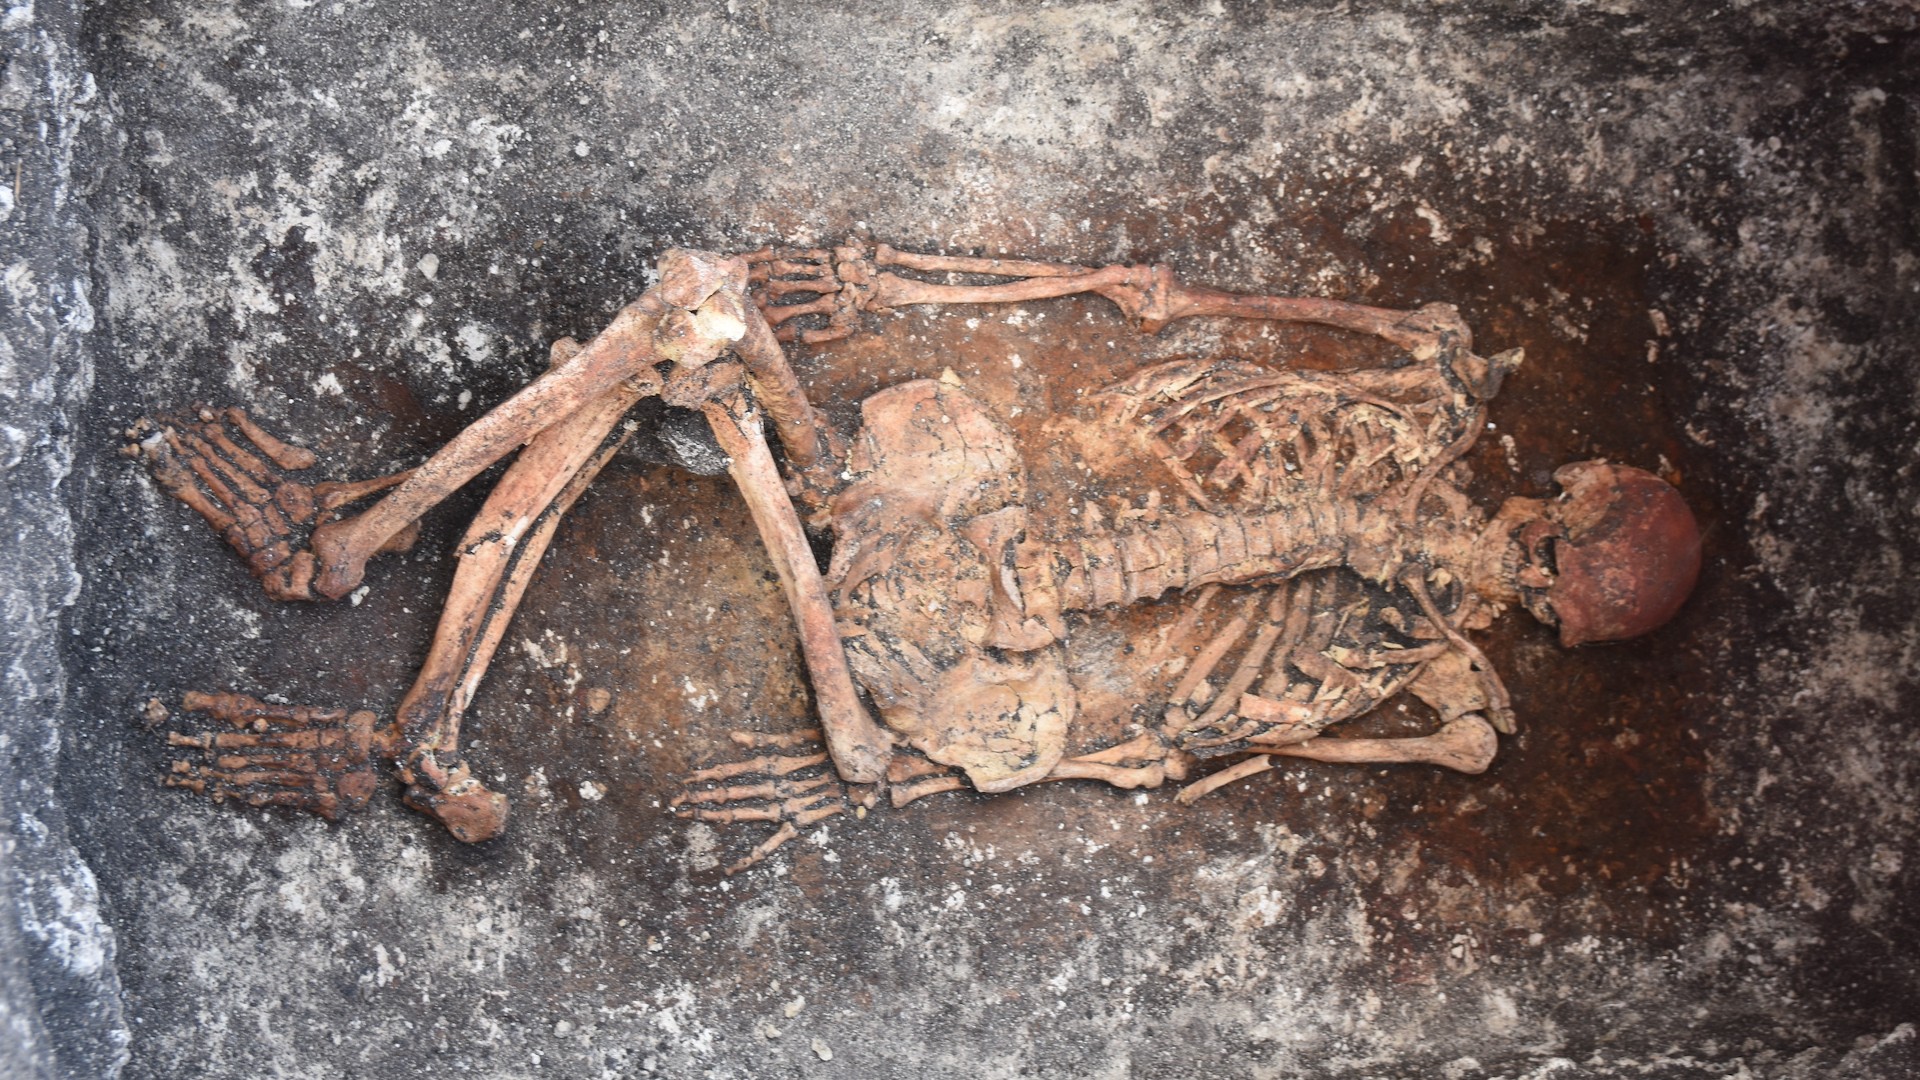 The remains of a horse rider found in Malomirovo, Bulgaria. He had a Yamnaya-style burial, and radiocarbon dating puts him in the 30th century B.C.